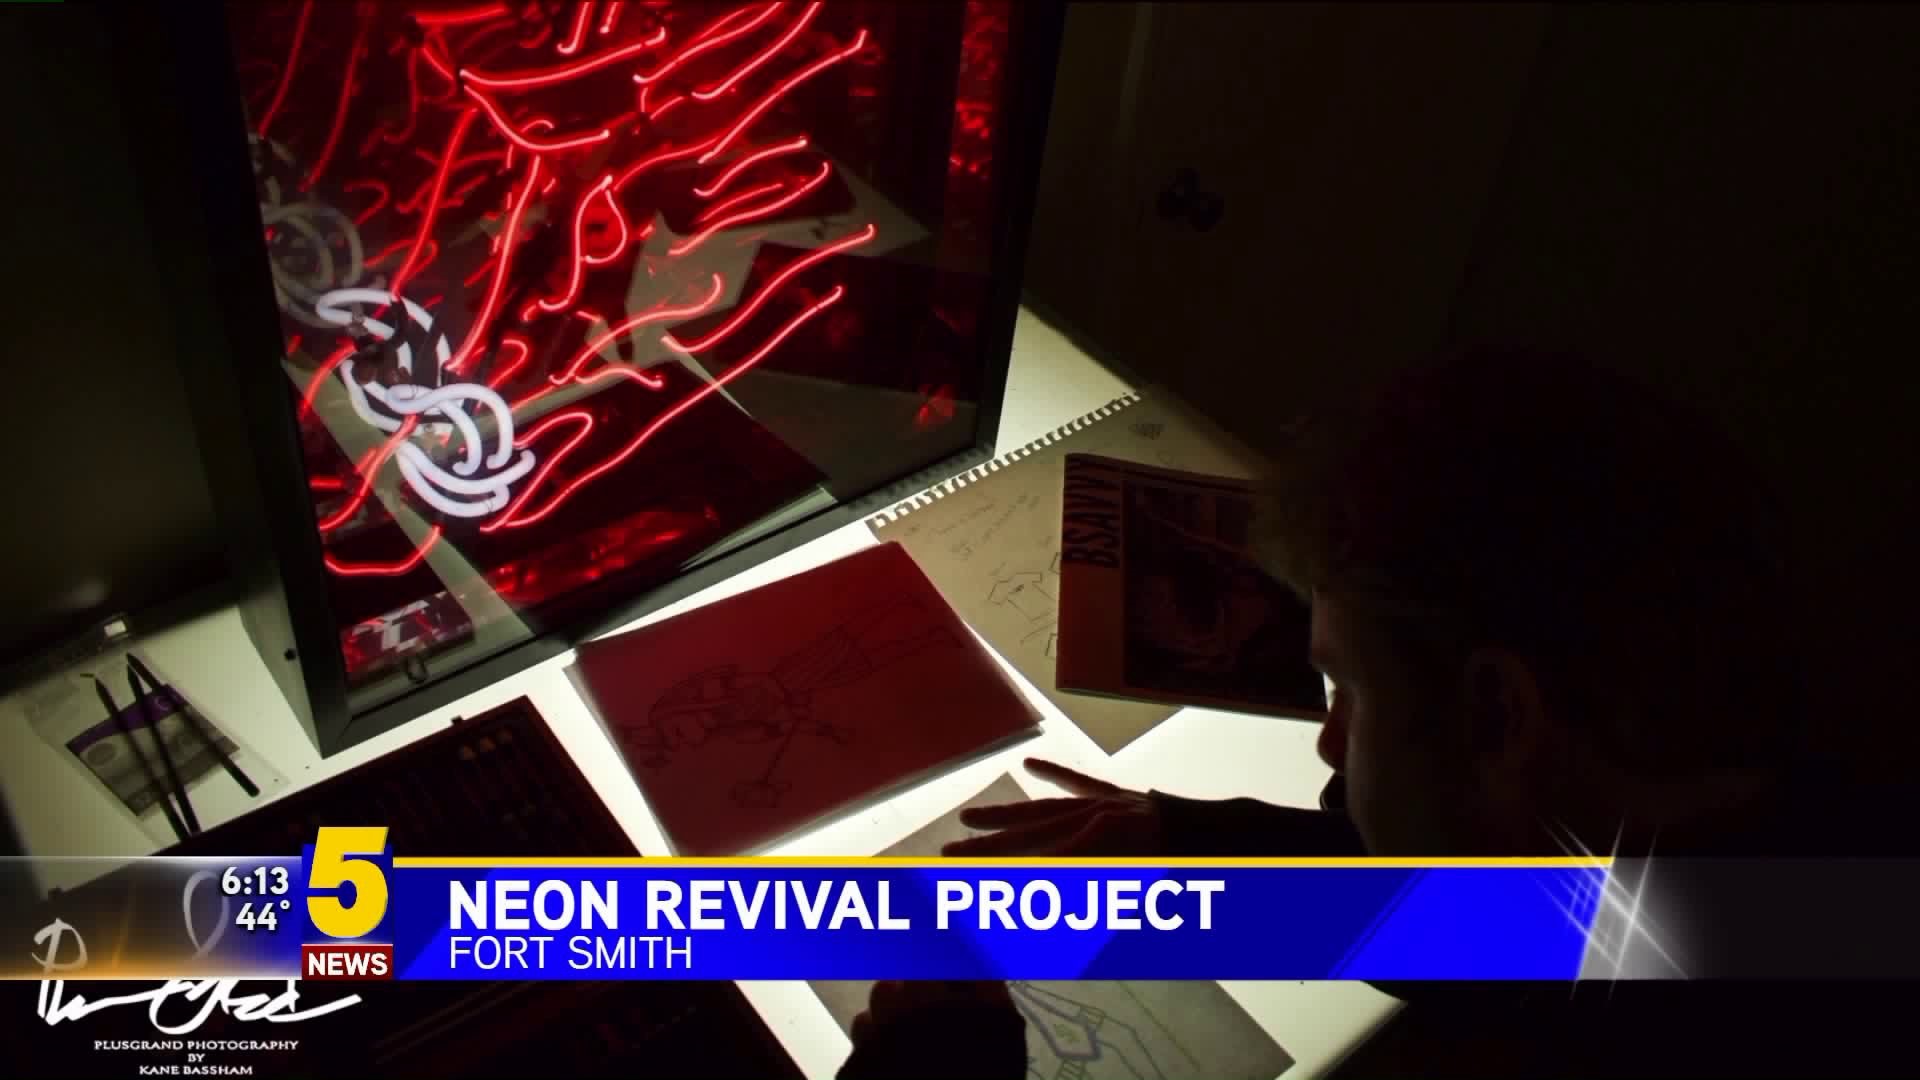 Neon Revival Project